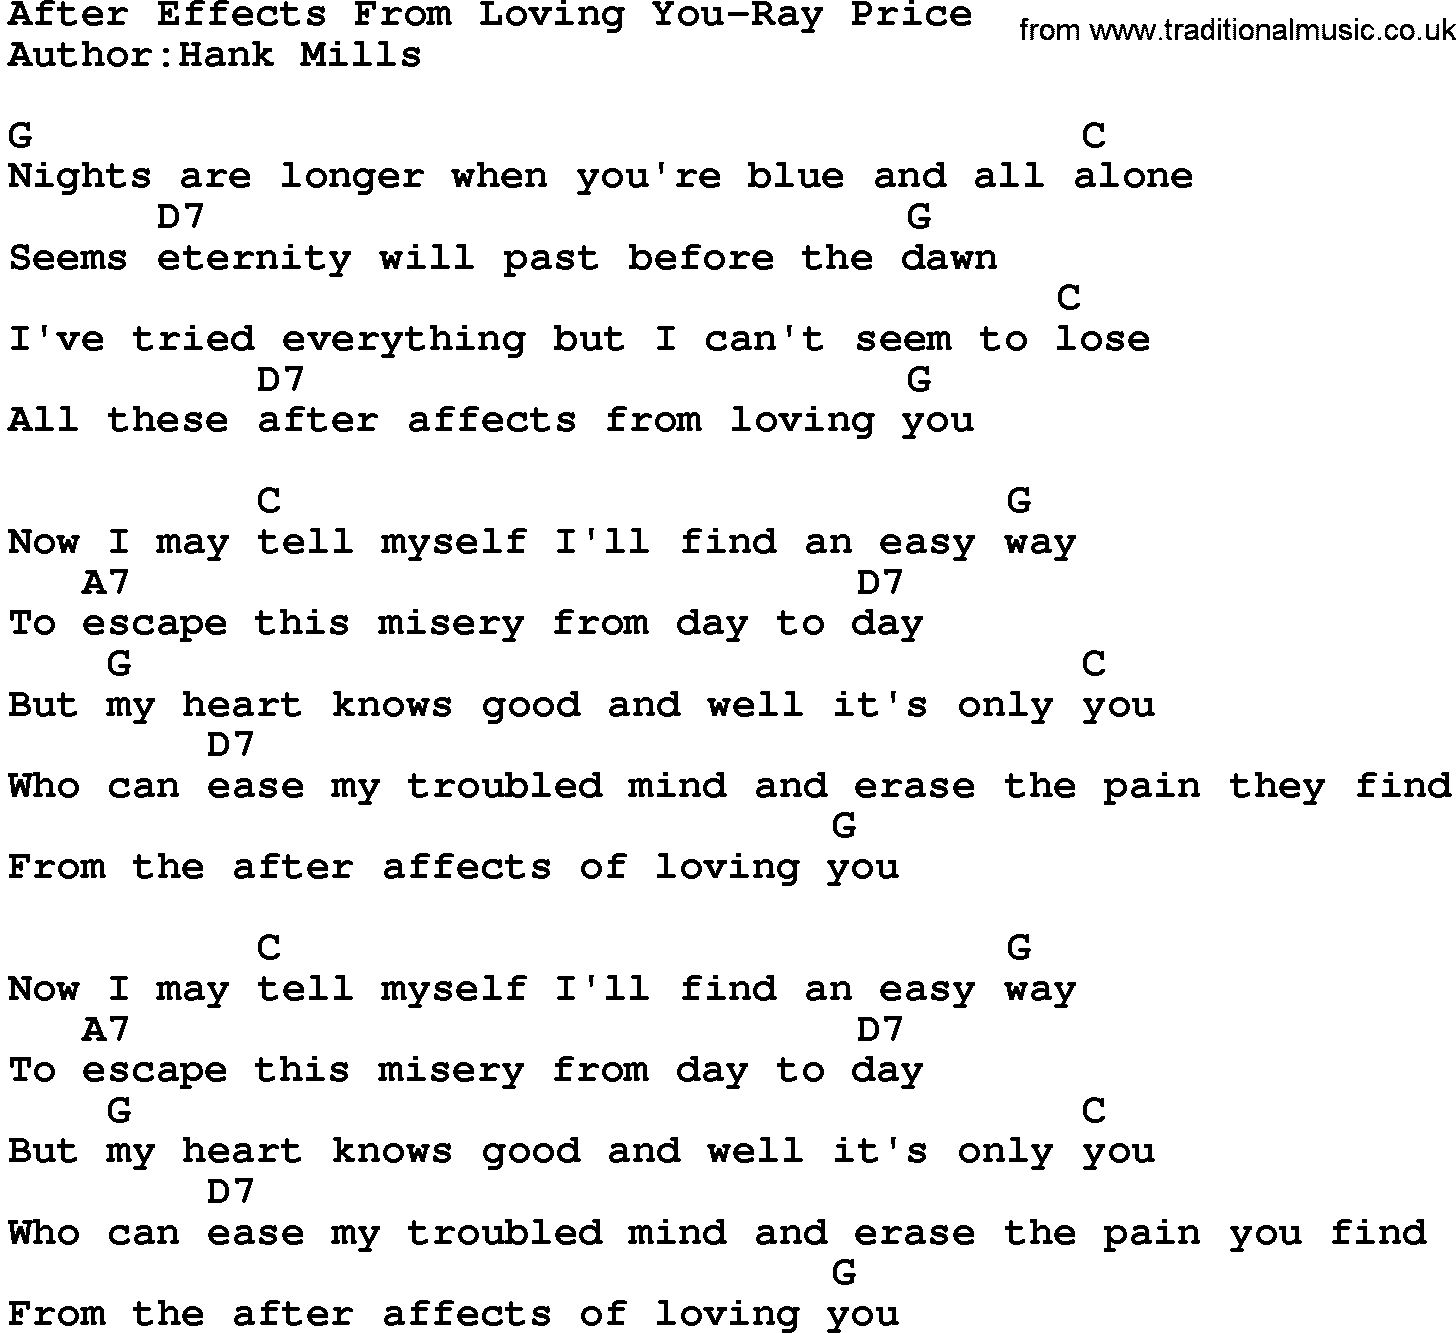 Country music song: After Effects From Loving You-Ray Price lyrics and chords